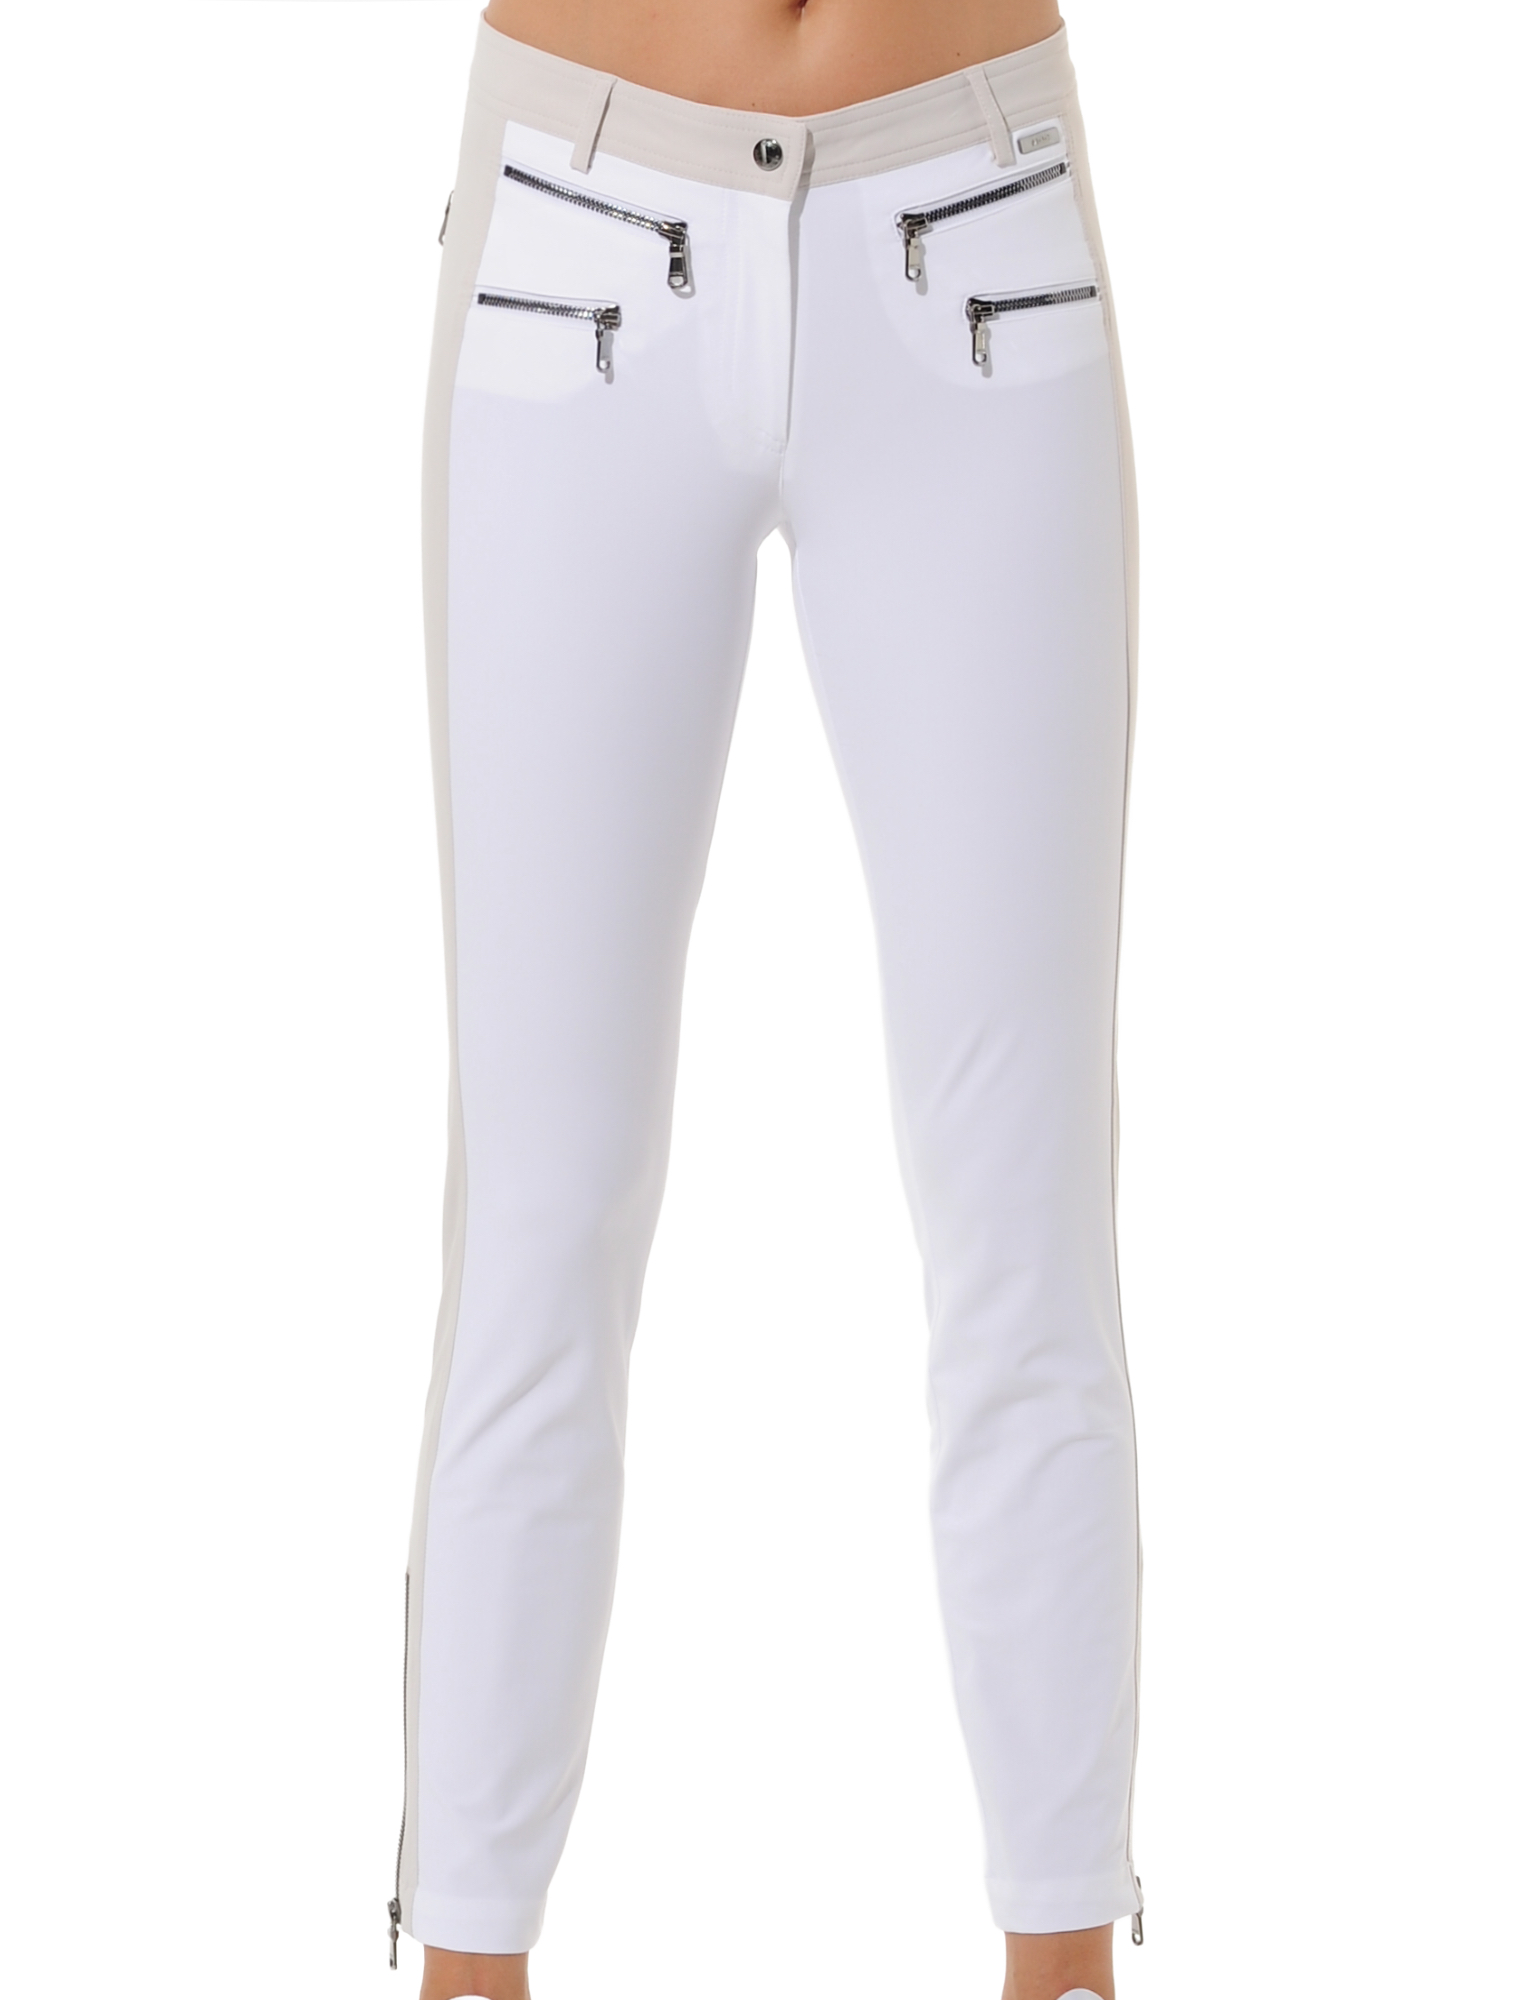 4way Stretch Double Zip Ankle Pants white/linen